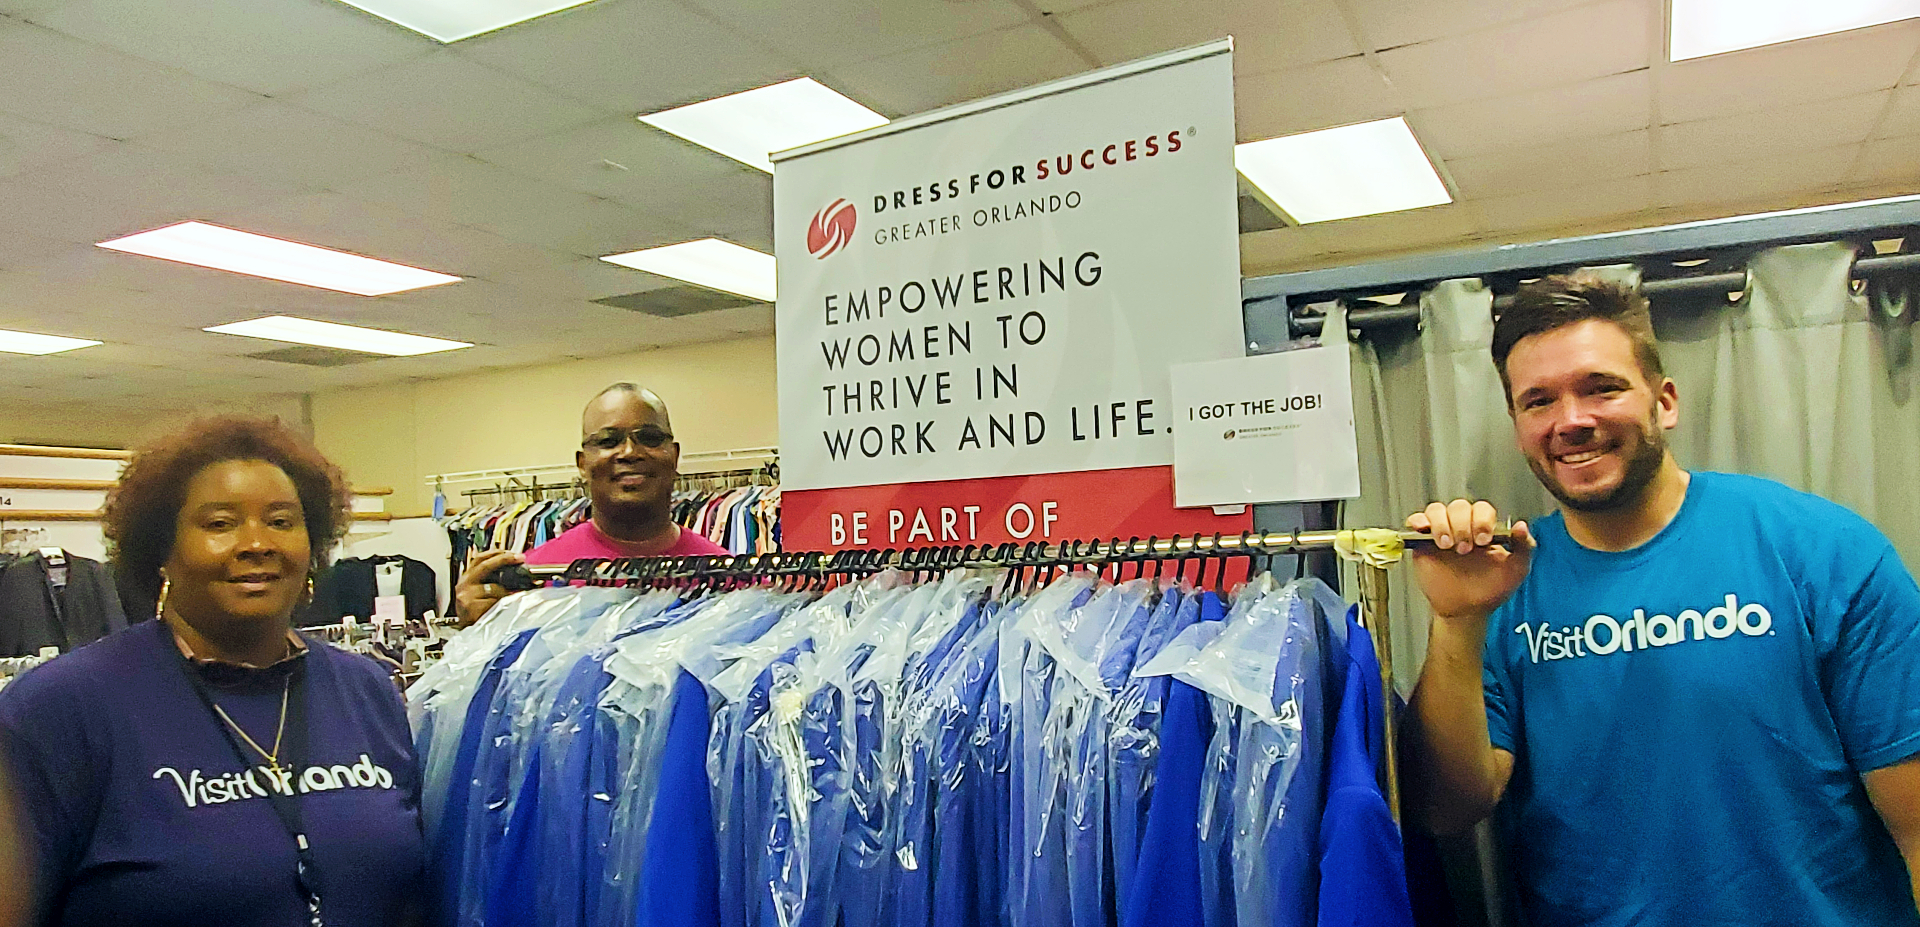 Visit Orlando staff drop off a donation of jackets to Dress for Success Greater Orlando